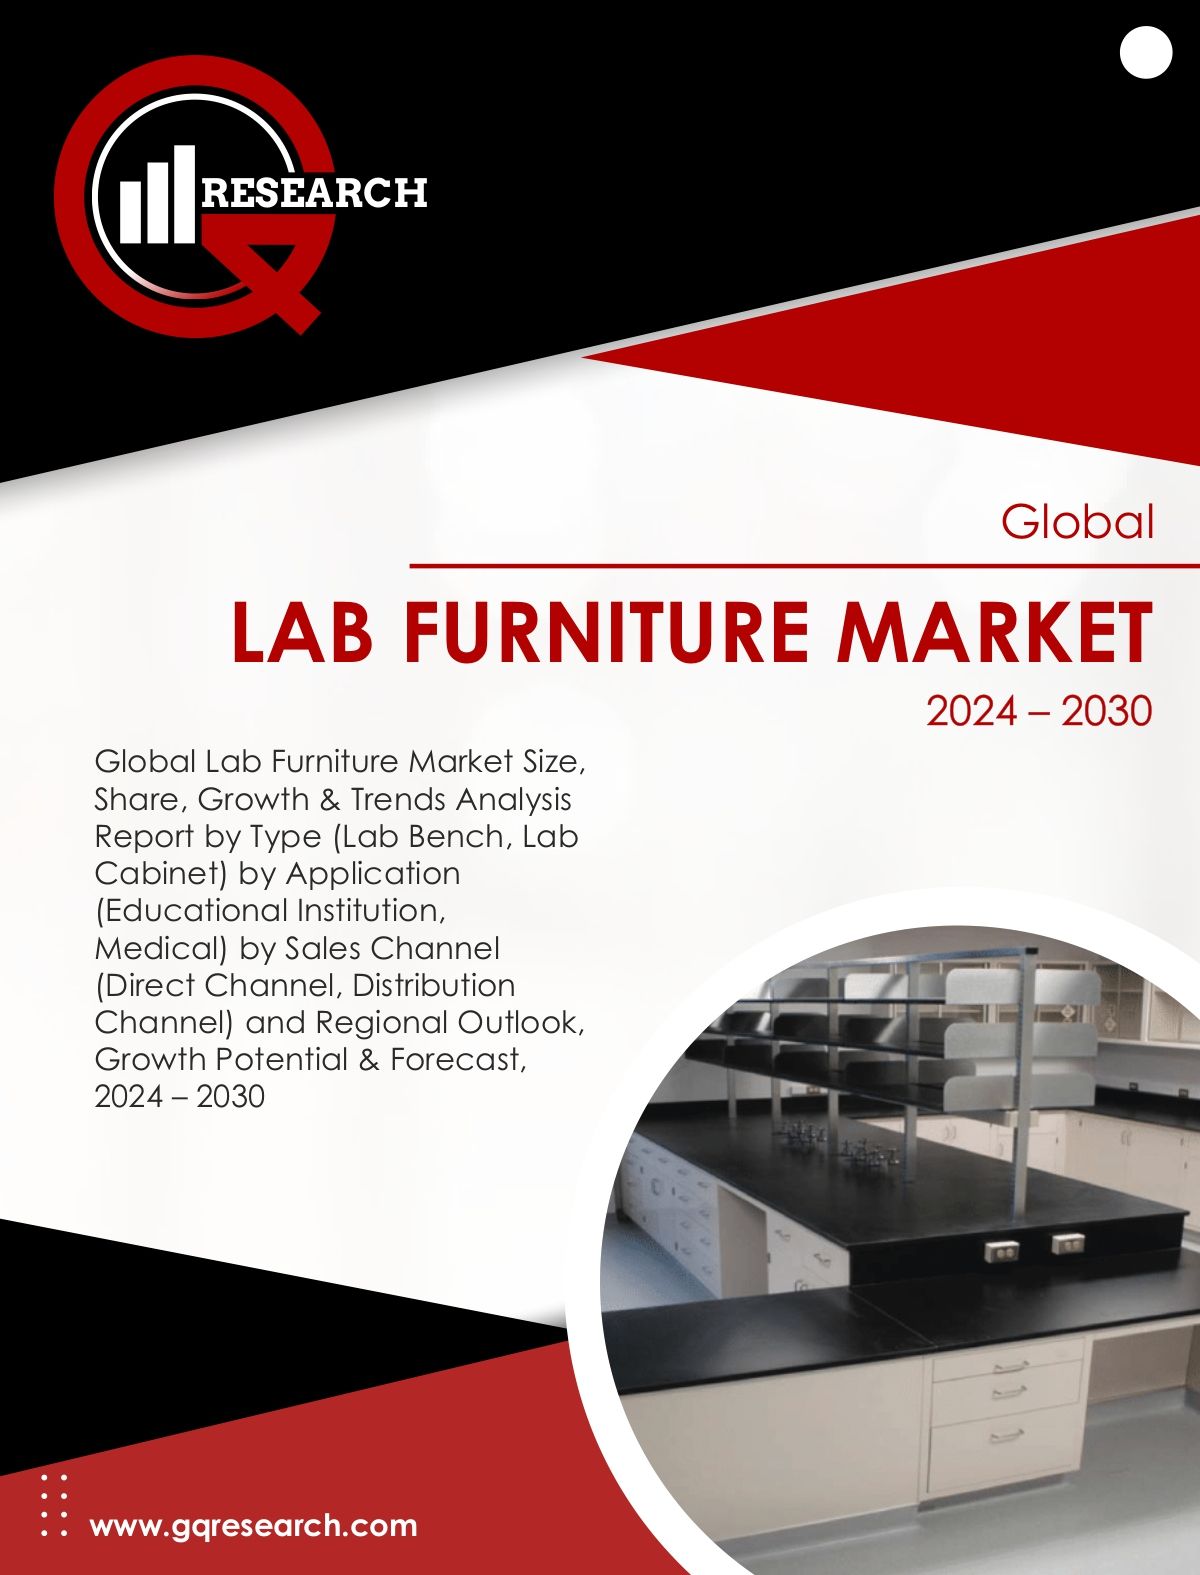 Lab Furniture Market Size, Share & Growth Analysis by 2030 | GQ Research